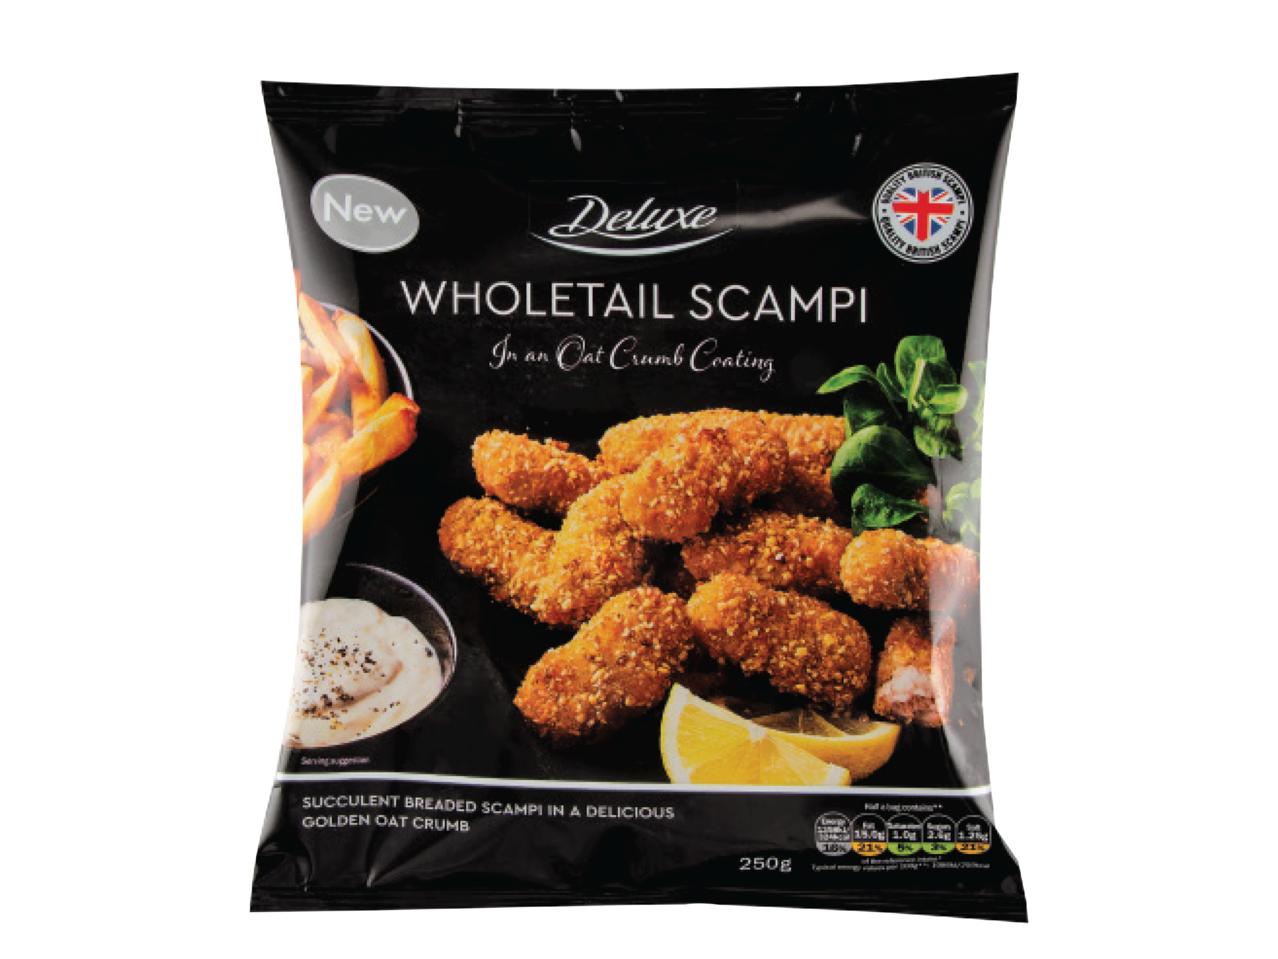 DELUXE Wholetail Scampi in an Oat Crumb Coatin